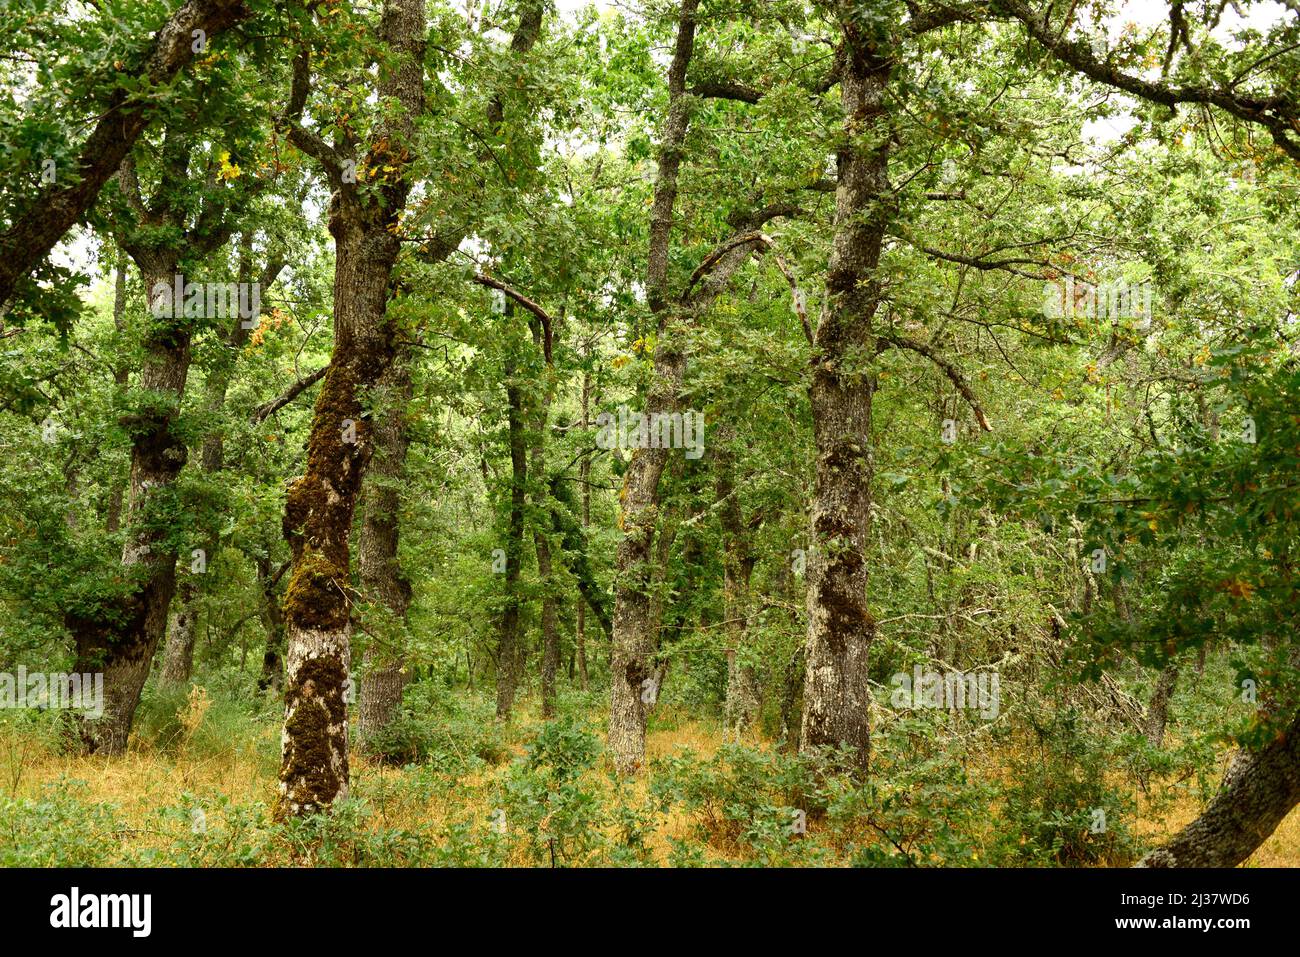 Sessile oak (Quercus petraea) is a deciduous tree native to central Europe, mountains of southern Europe and Asia Minor. This photo was taken in Stock Photo